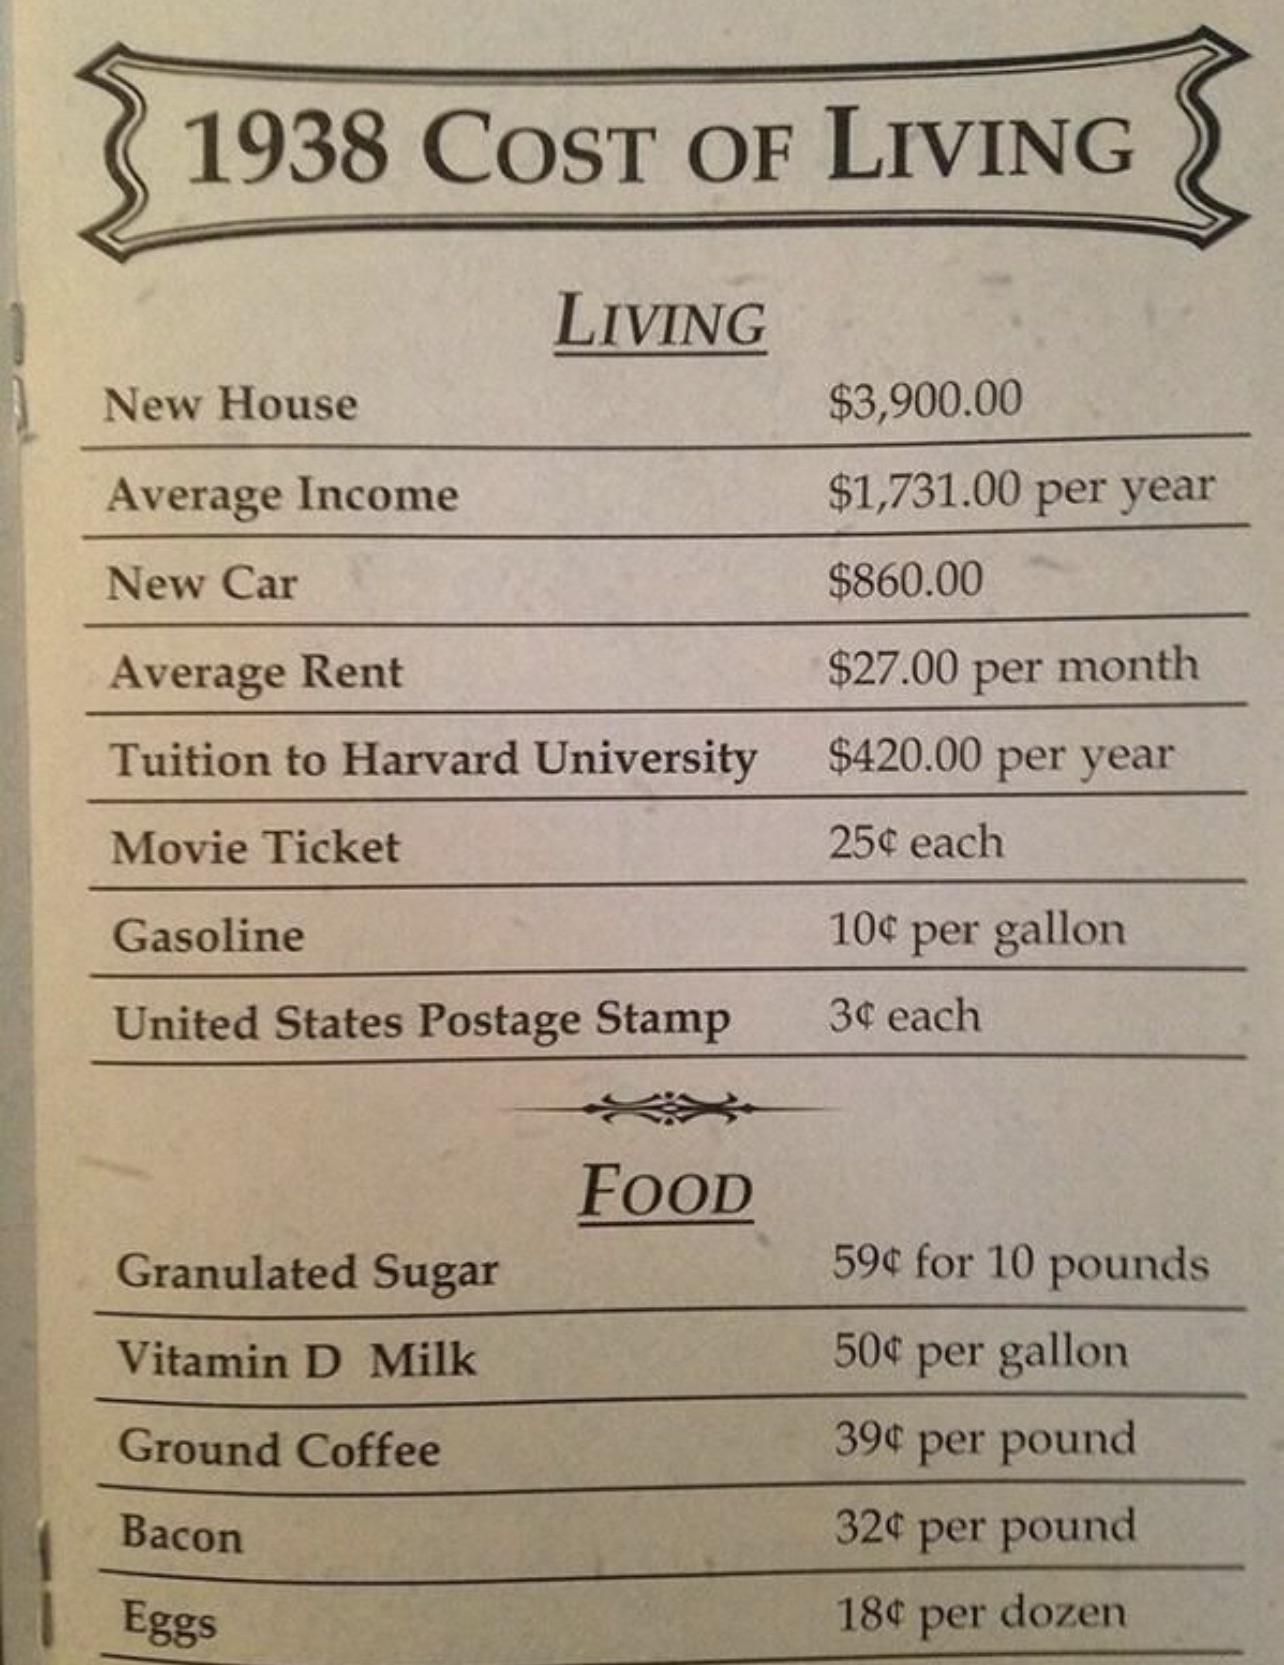 The cost of living.jpg